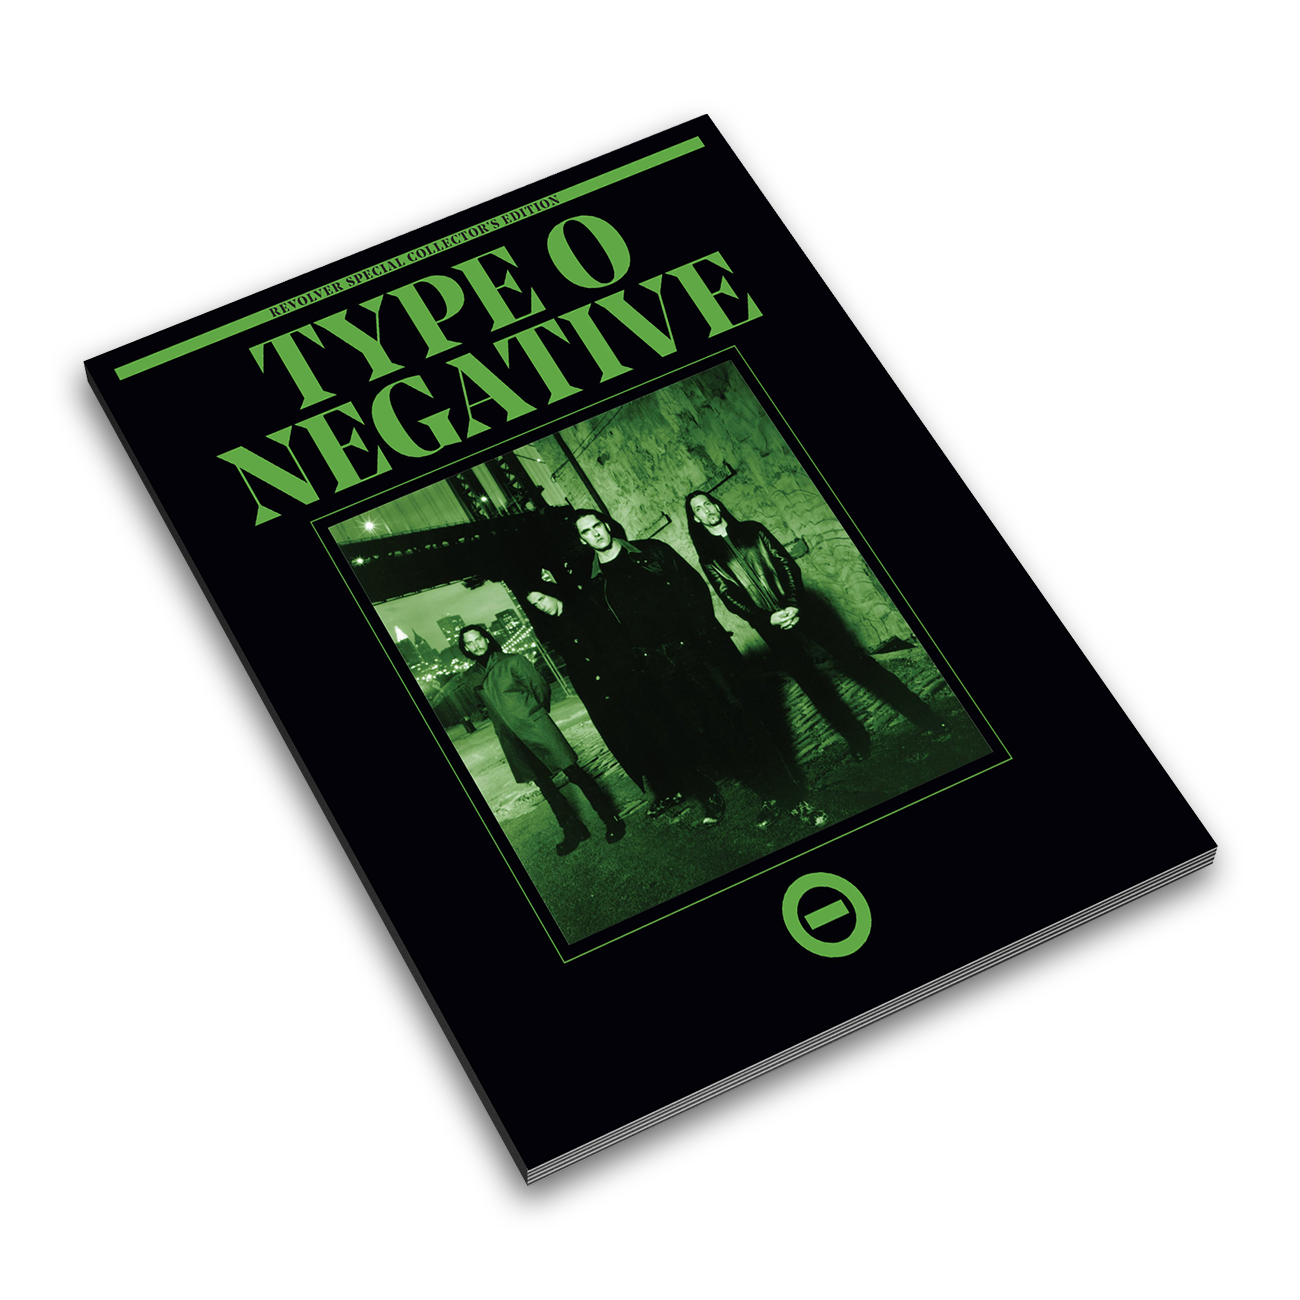 REVOLVER x TYPE O NEGATIVE SPECIAL EDITION ISSUE COLLECTOR'S BOX – ONLY 250 AVAILABLE